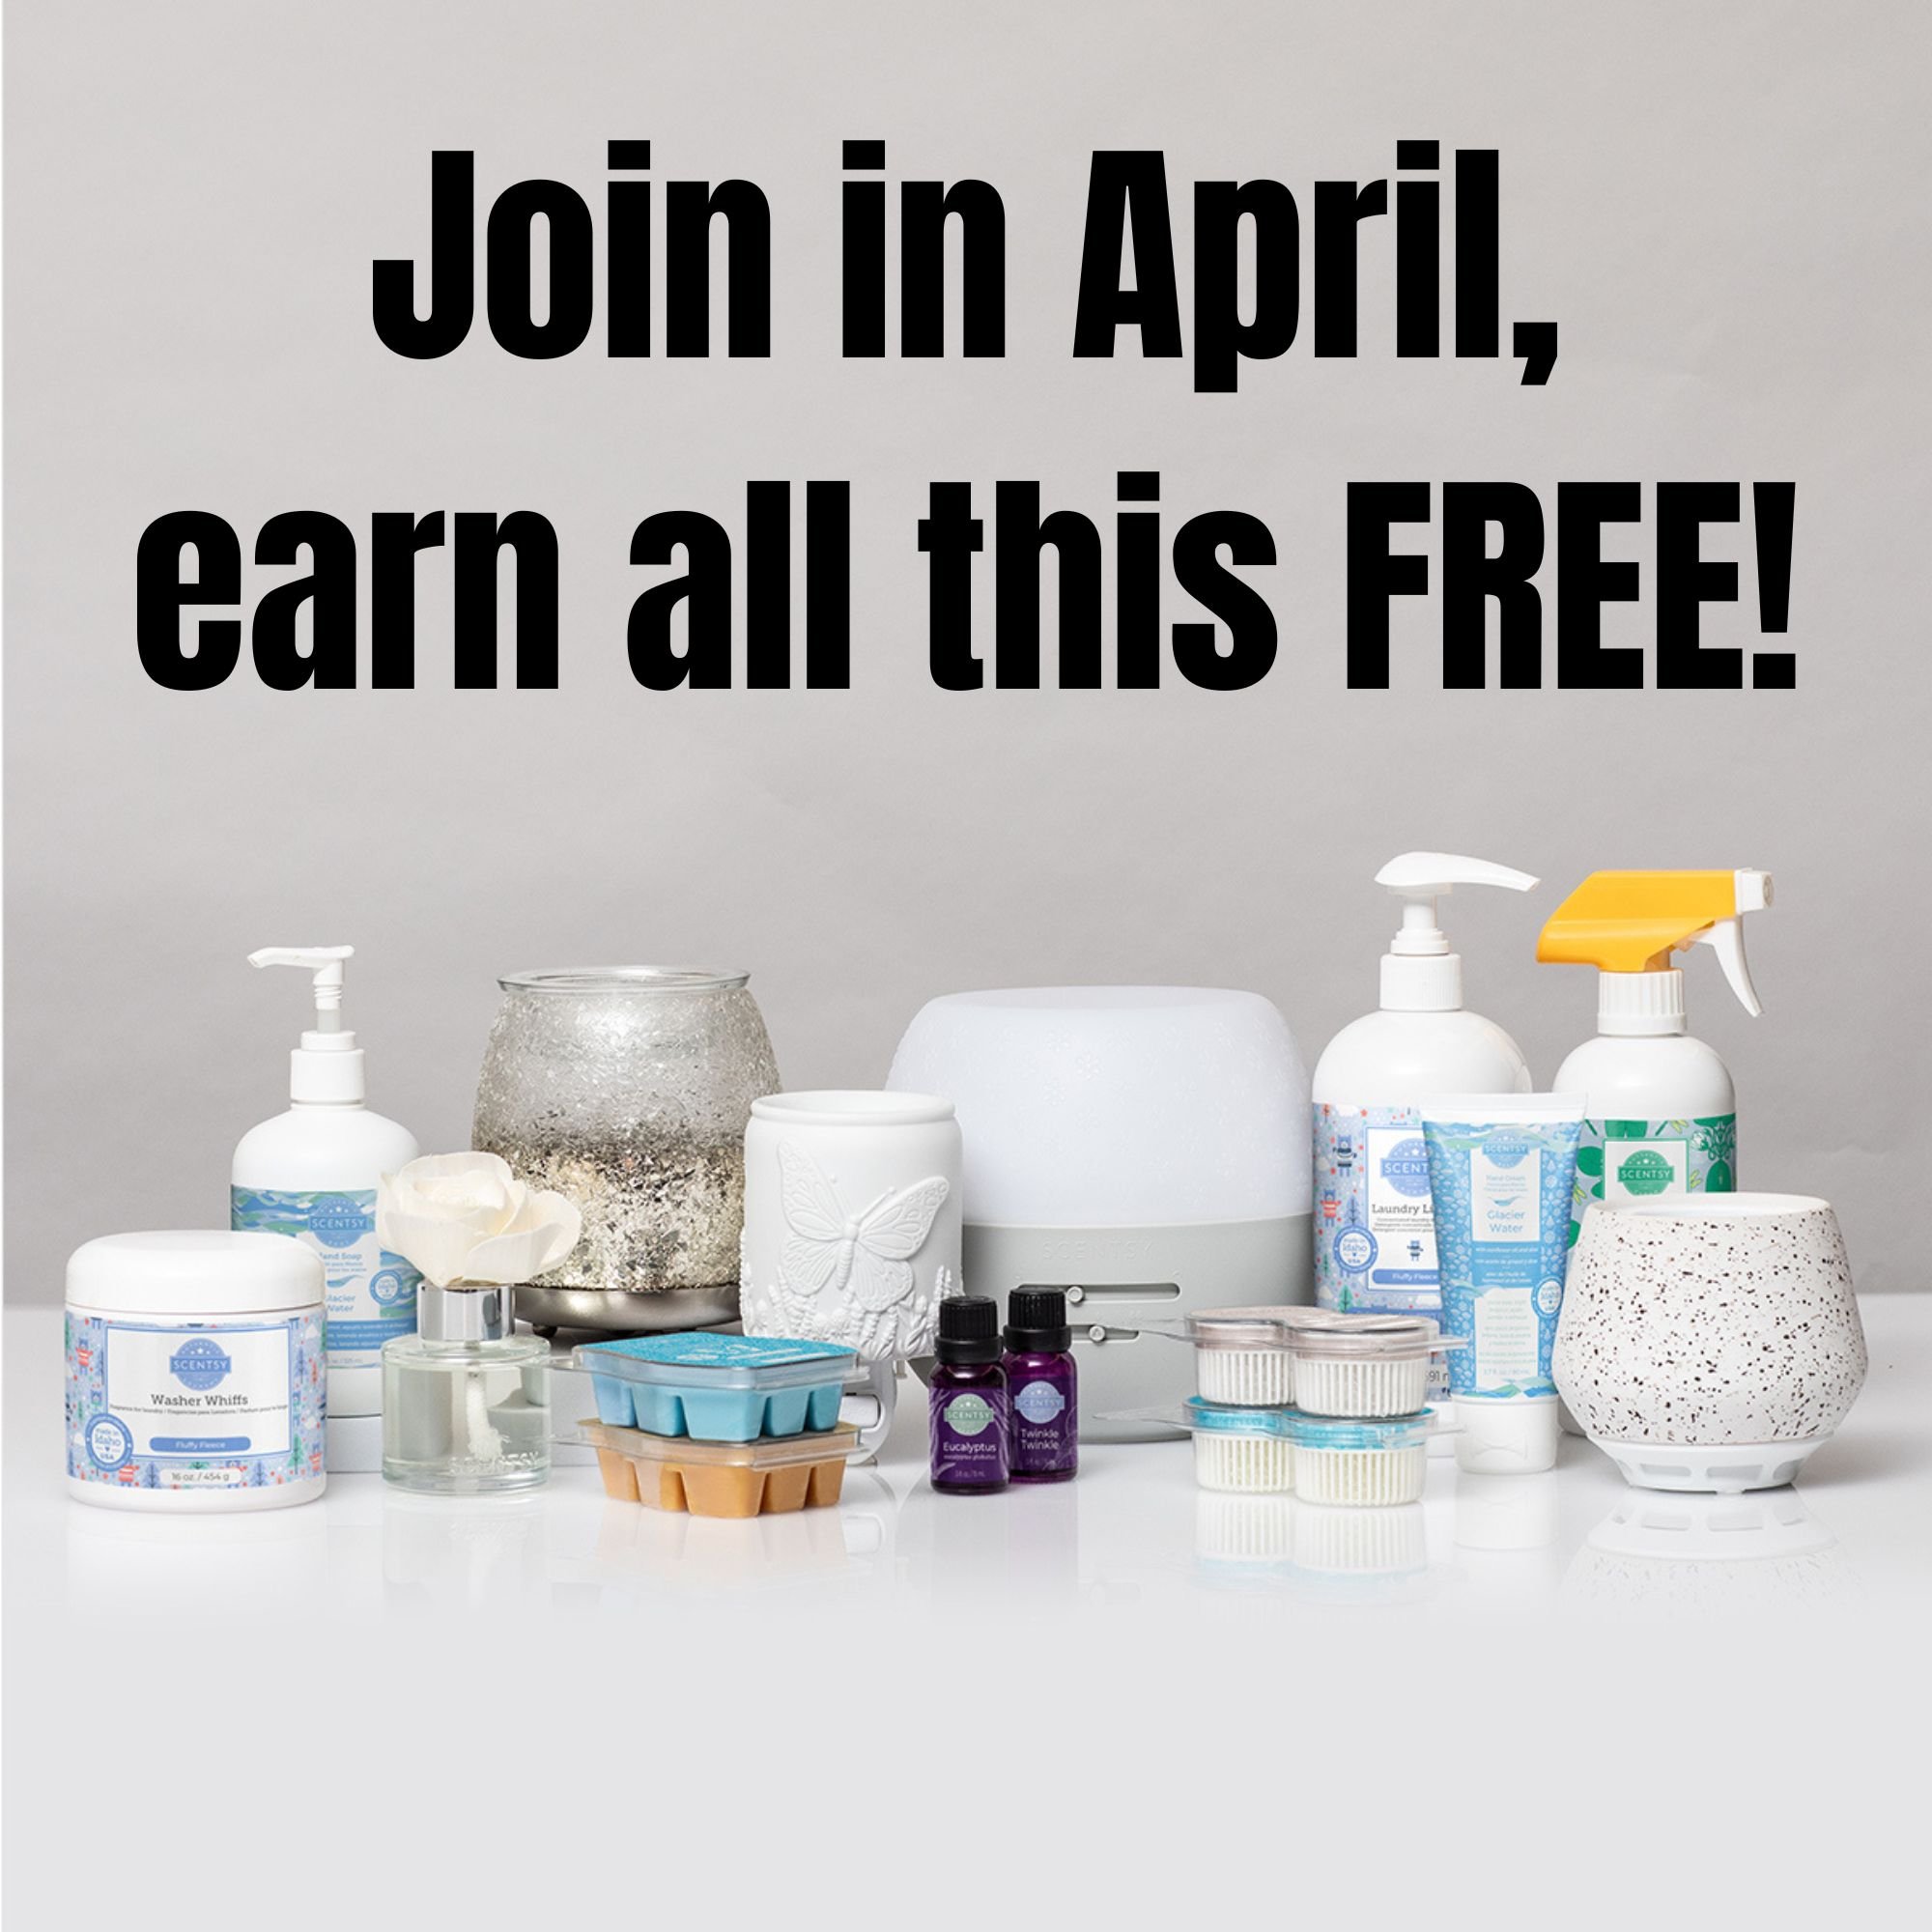 Join Scentsy in April, earn free product kit